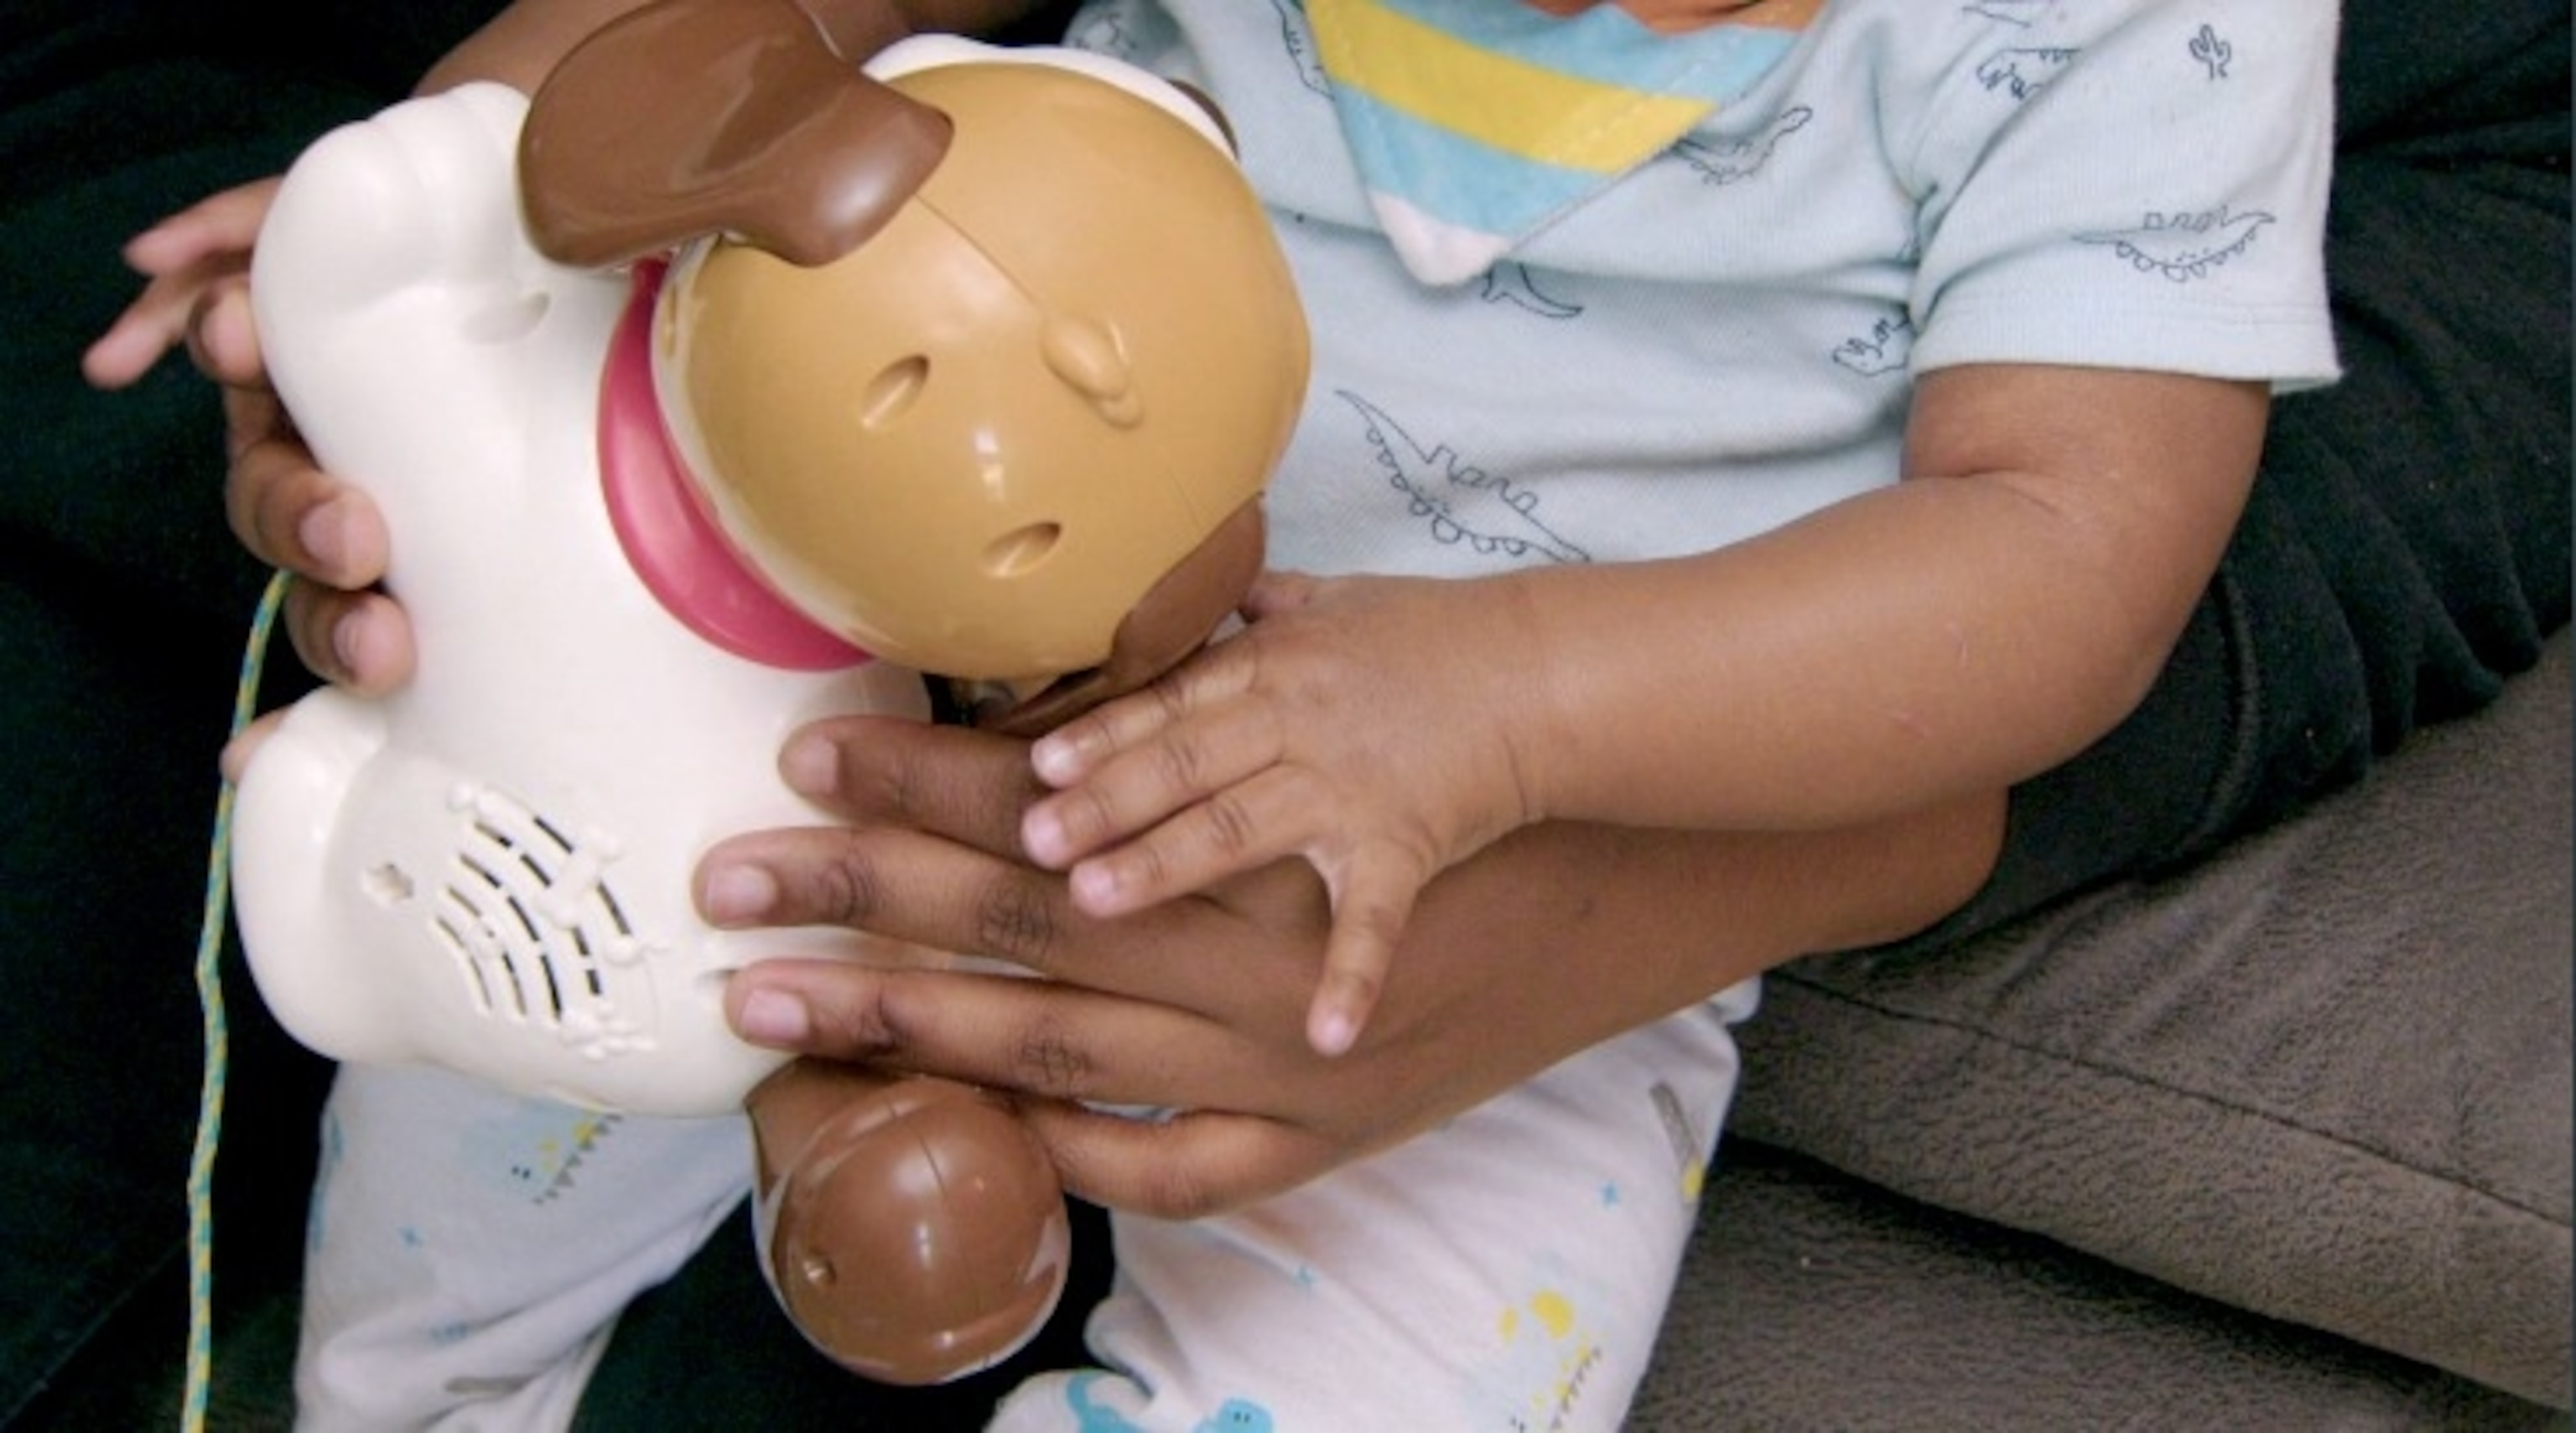 PHOTO: At just 13-years-old Ashley became a mother to a little baby boy nicknamed "Peanut."